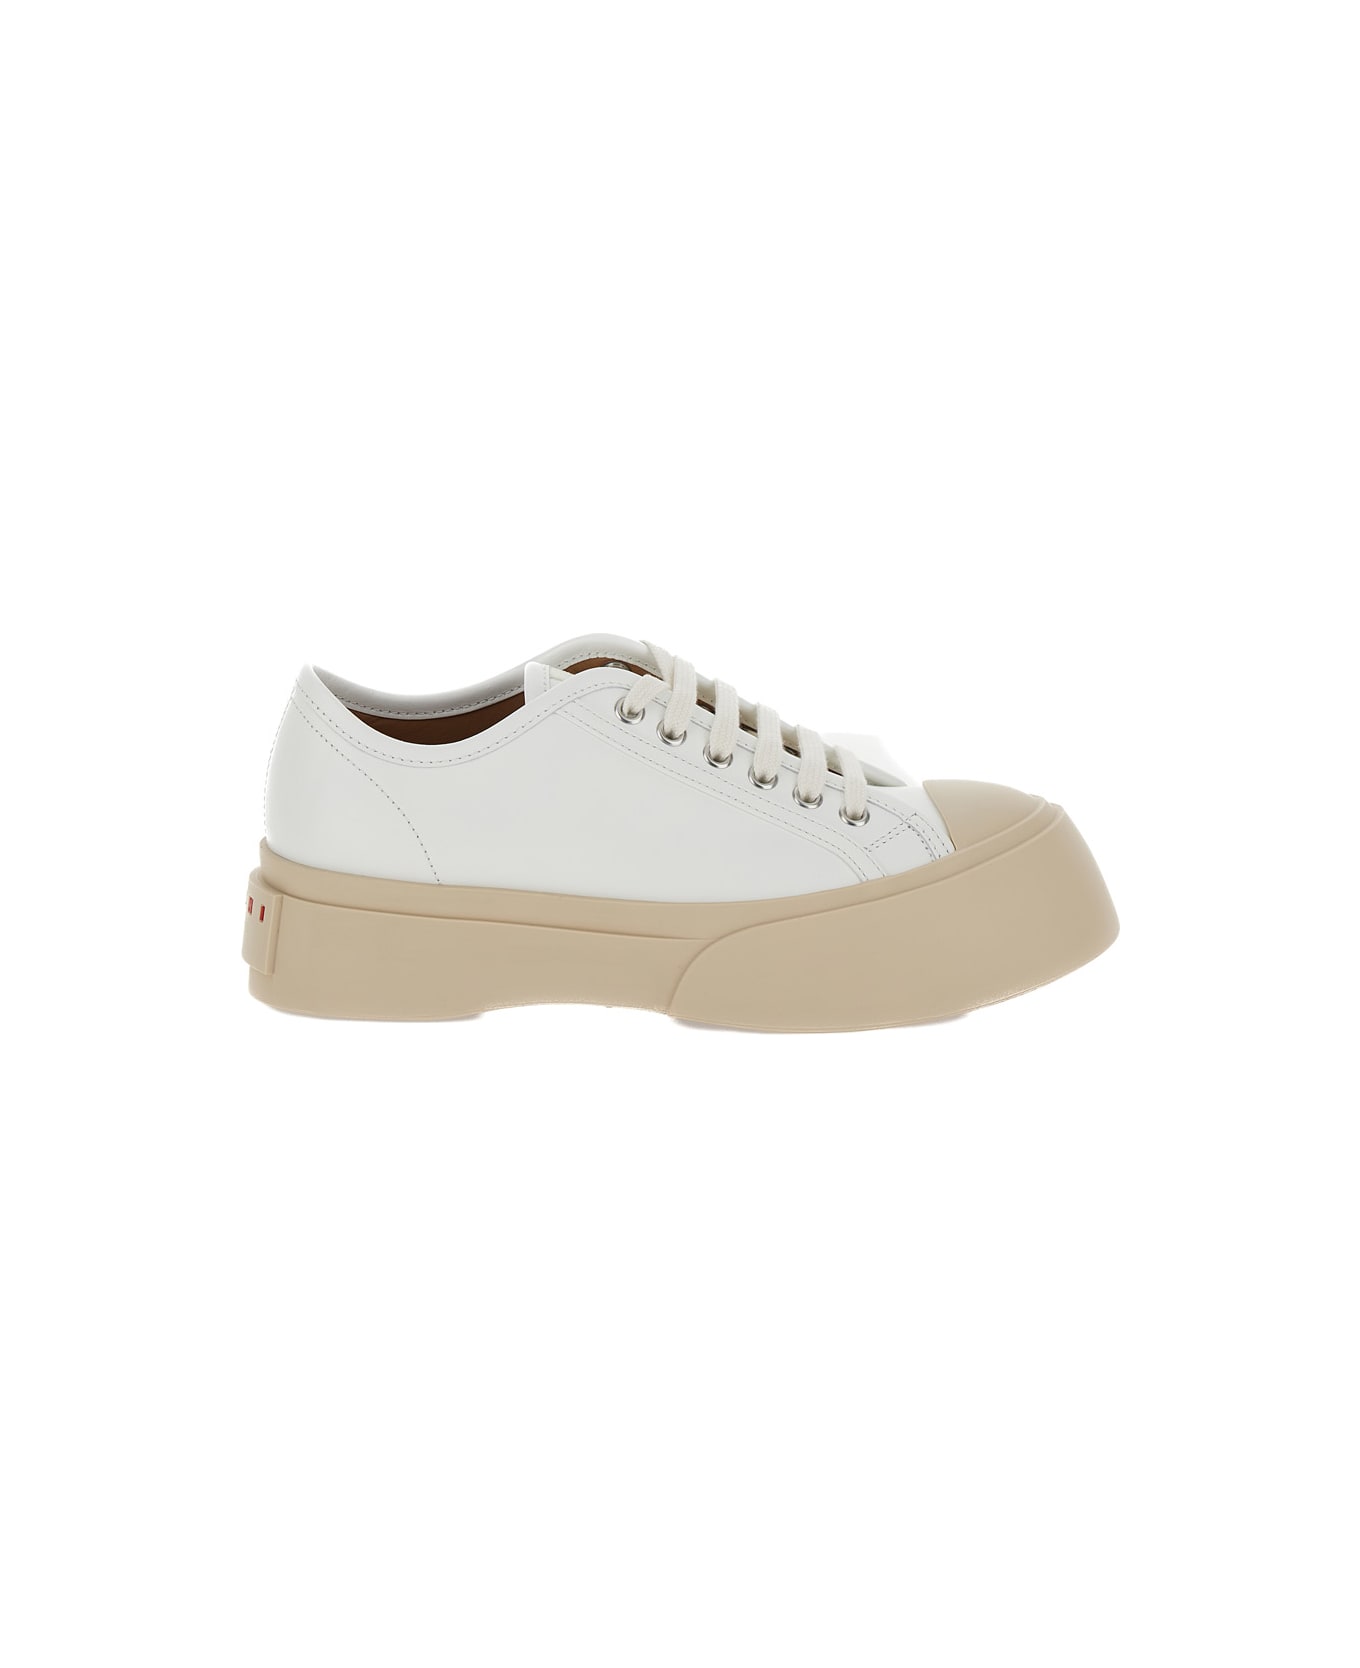 Marni 'pablo' White Sneakers With Lace Up Closure In Leather Woman - White